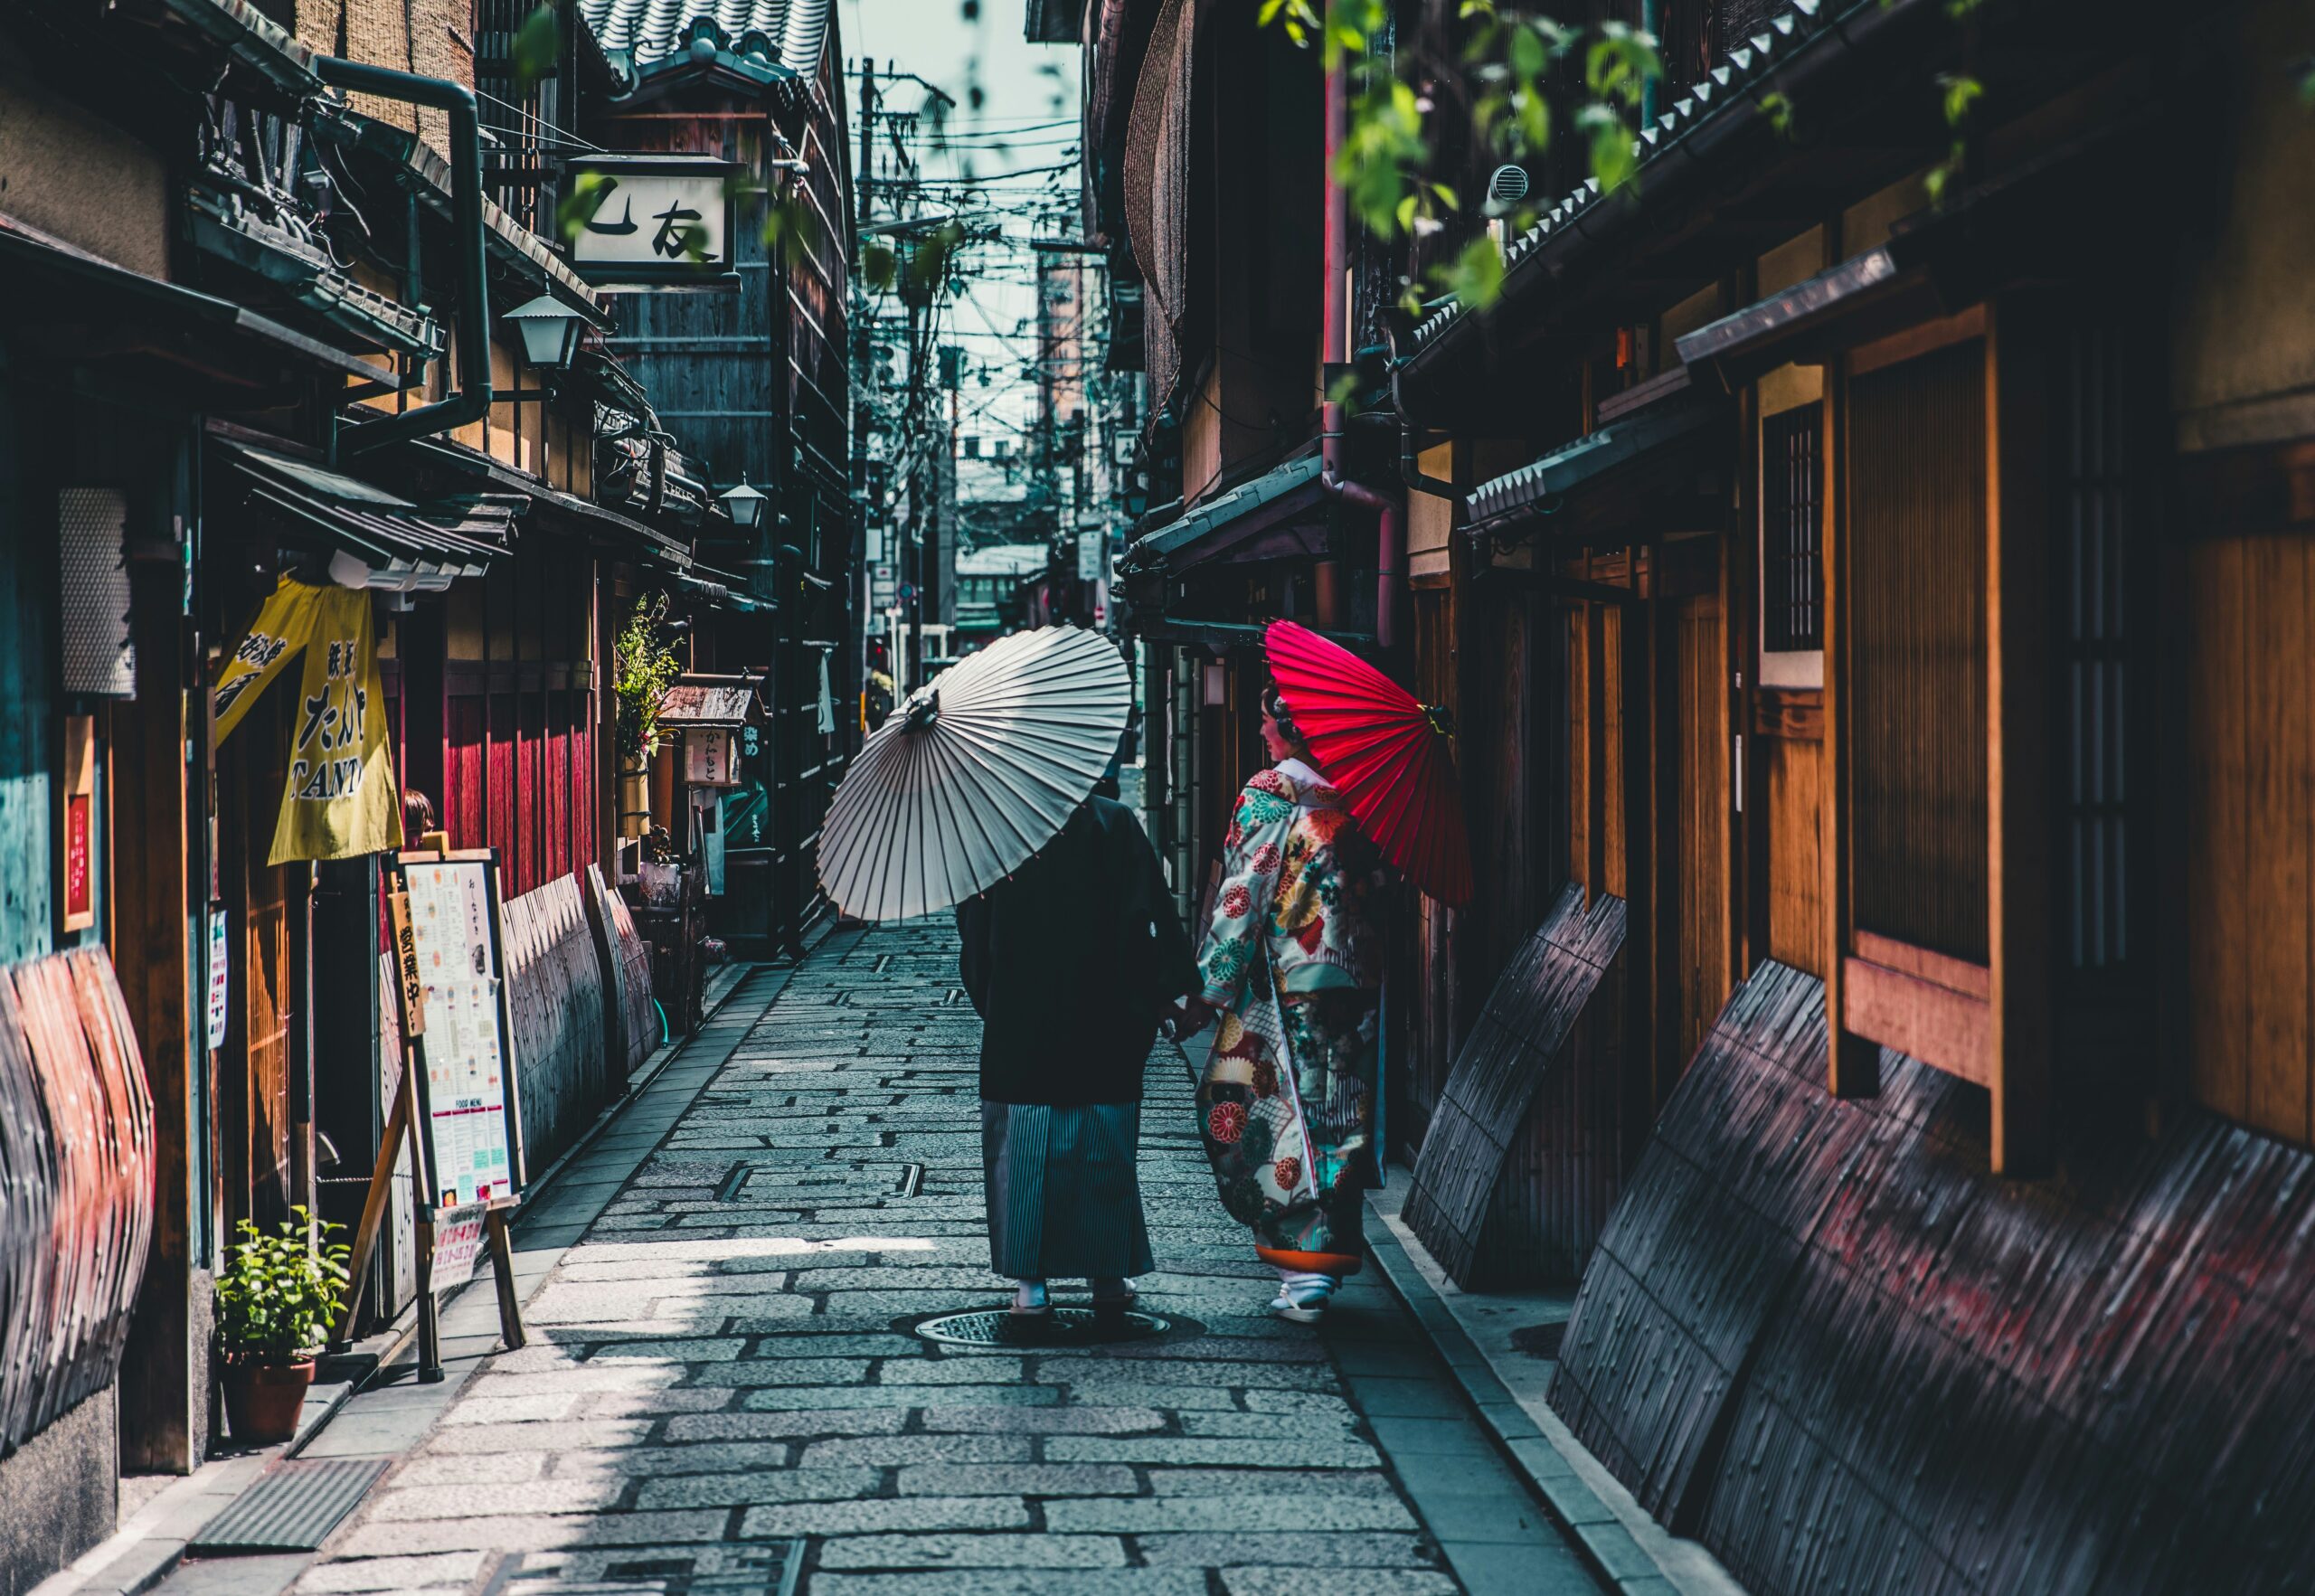 Two people walking down a street holding Japanese umbrellas